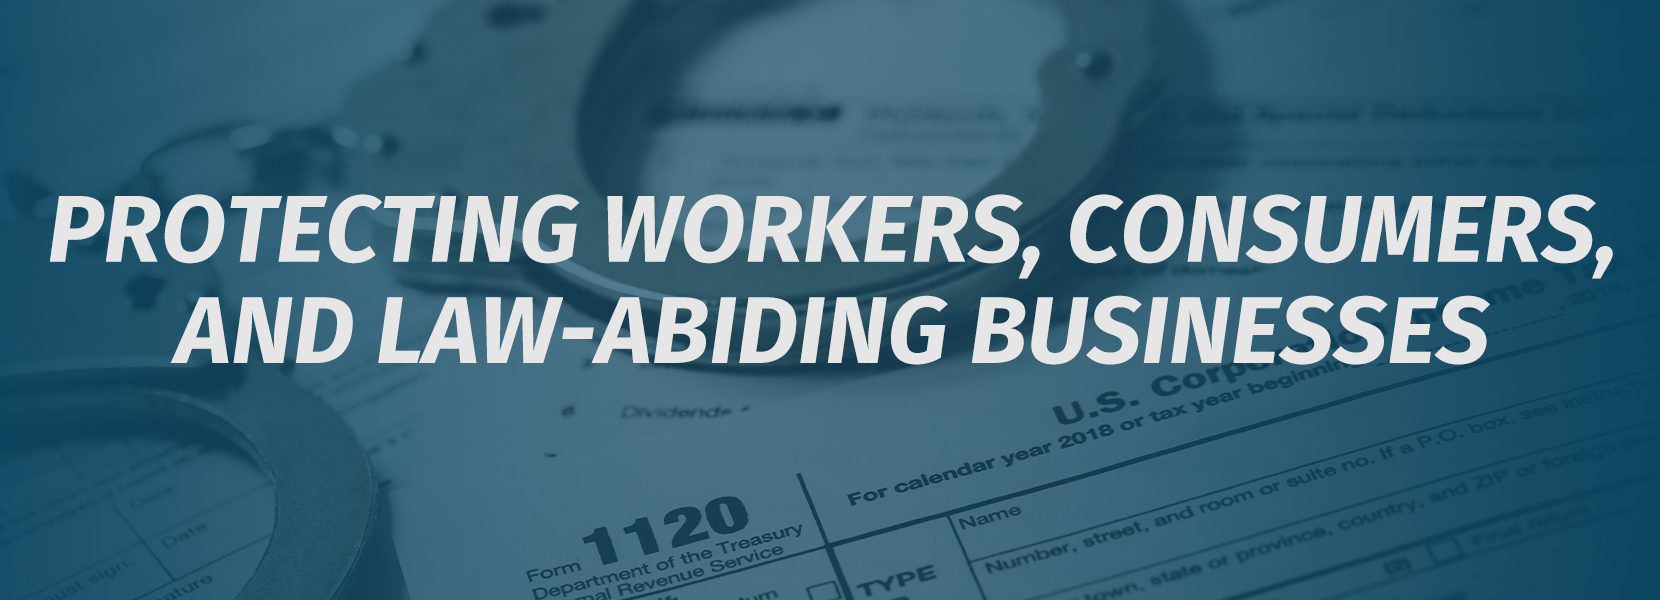 Protecting Workers, Consumers, and Law-Abiding Businesses